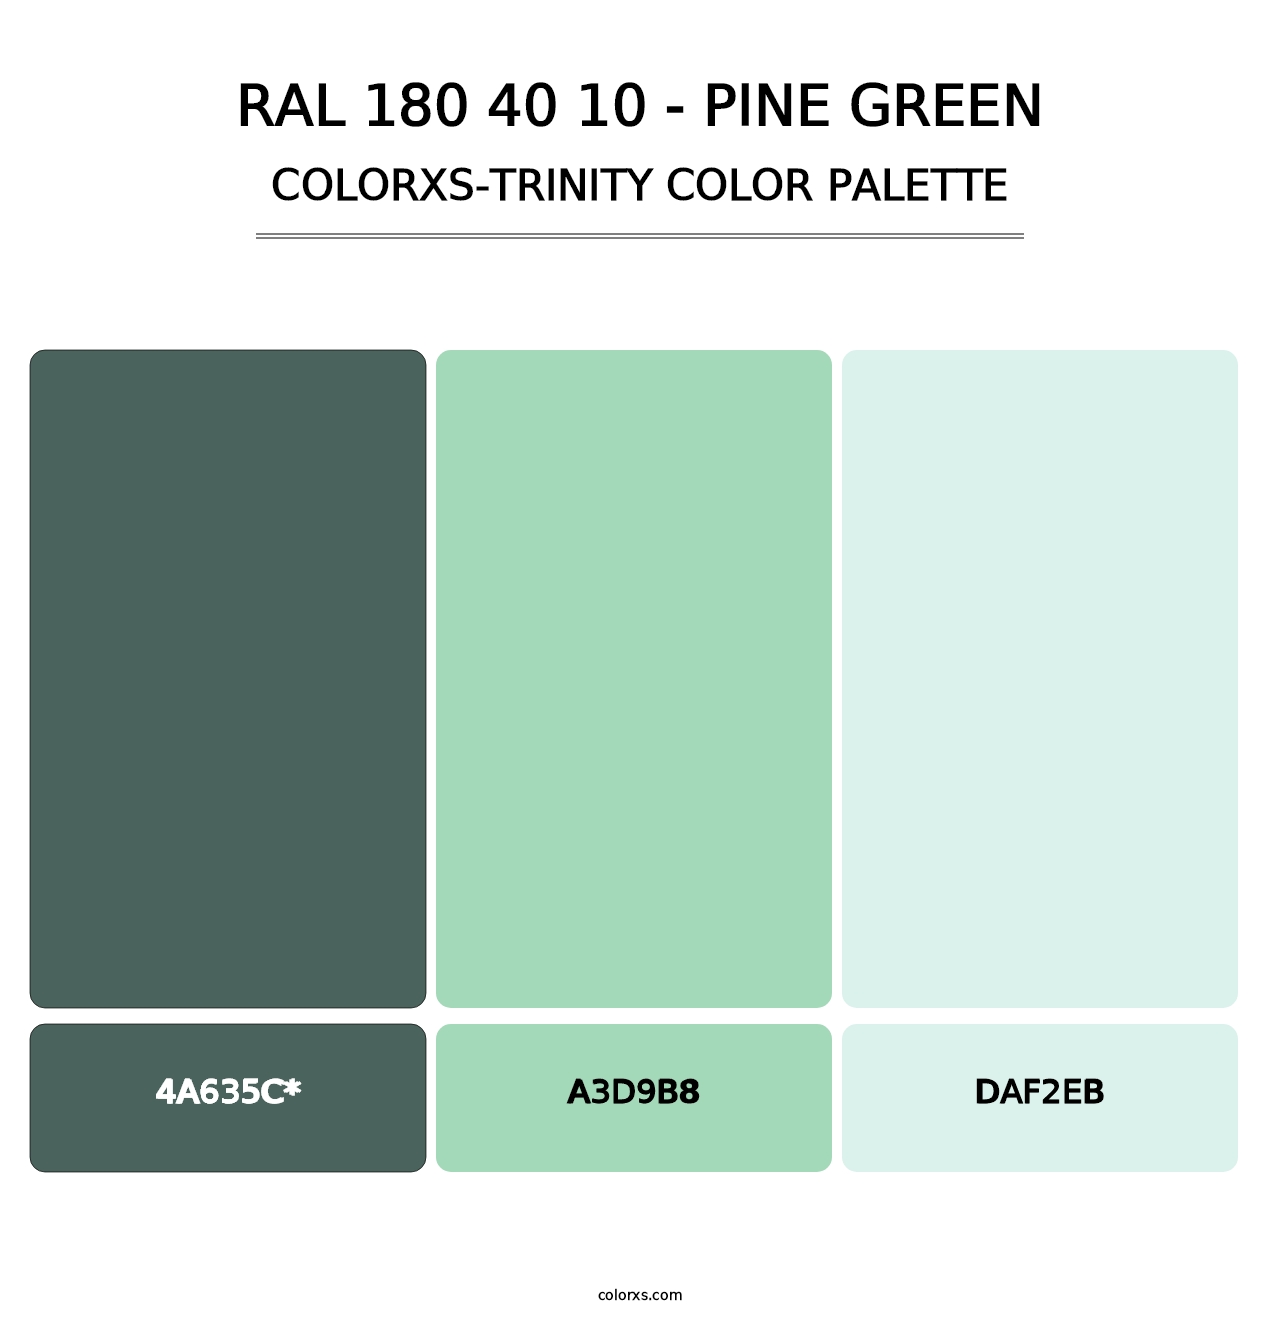 RAL 180 40 10 - Pine Green - Colorxs Trinity Palette